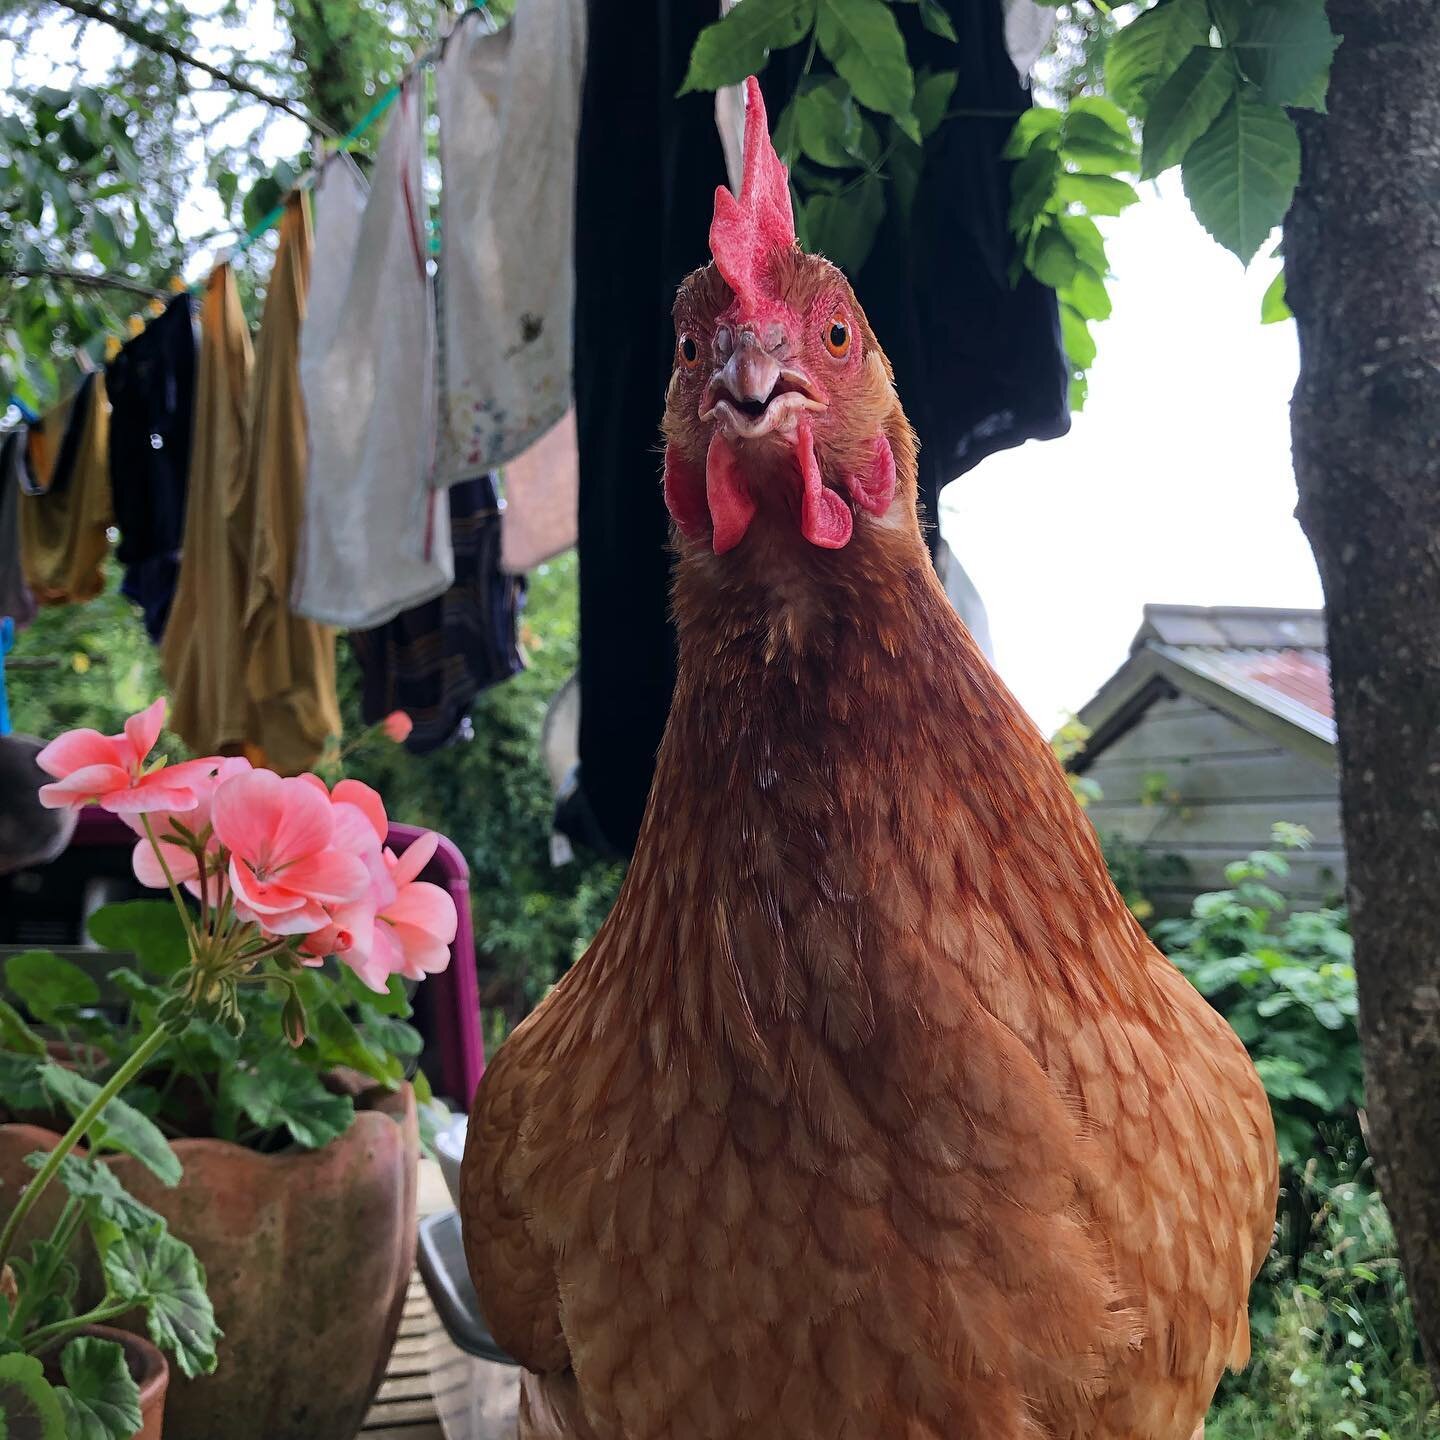 George-The-Hen says it&rsquo;s definitely a day to sit in the shade of a tree while your washing dries on the line. 

I hope you have a cool shady spot to sit in today if it&rsquo;s hot where are &lt;3

🐓☀️🌴🐌

#GoGently
#MECFS